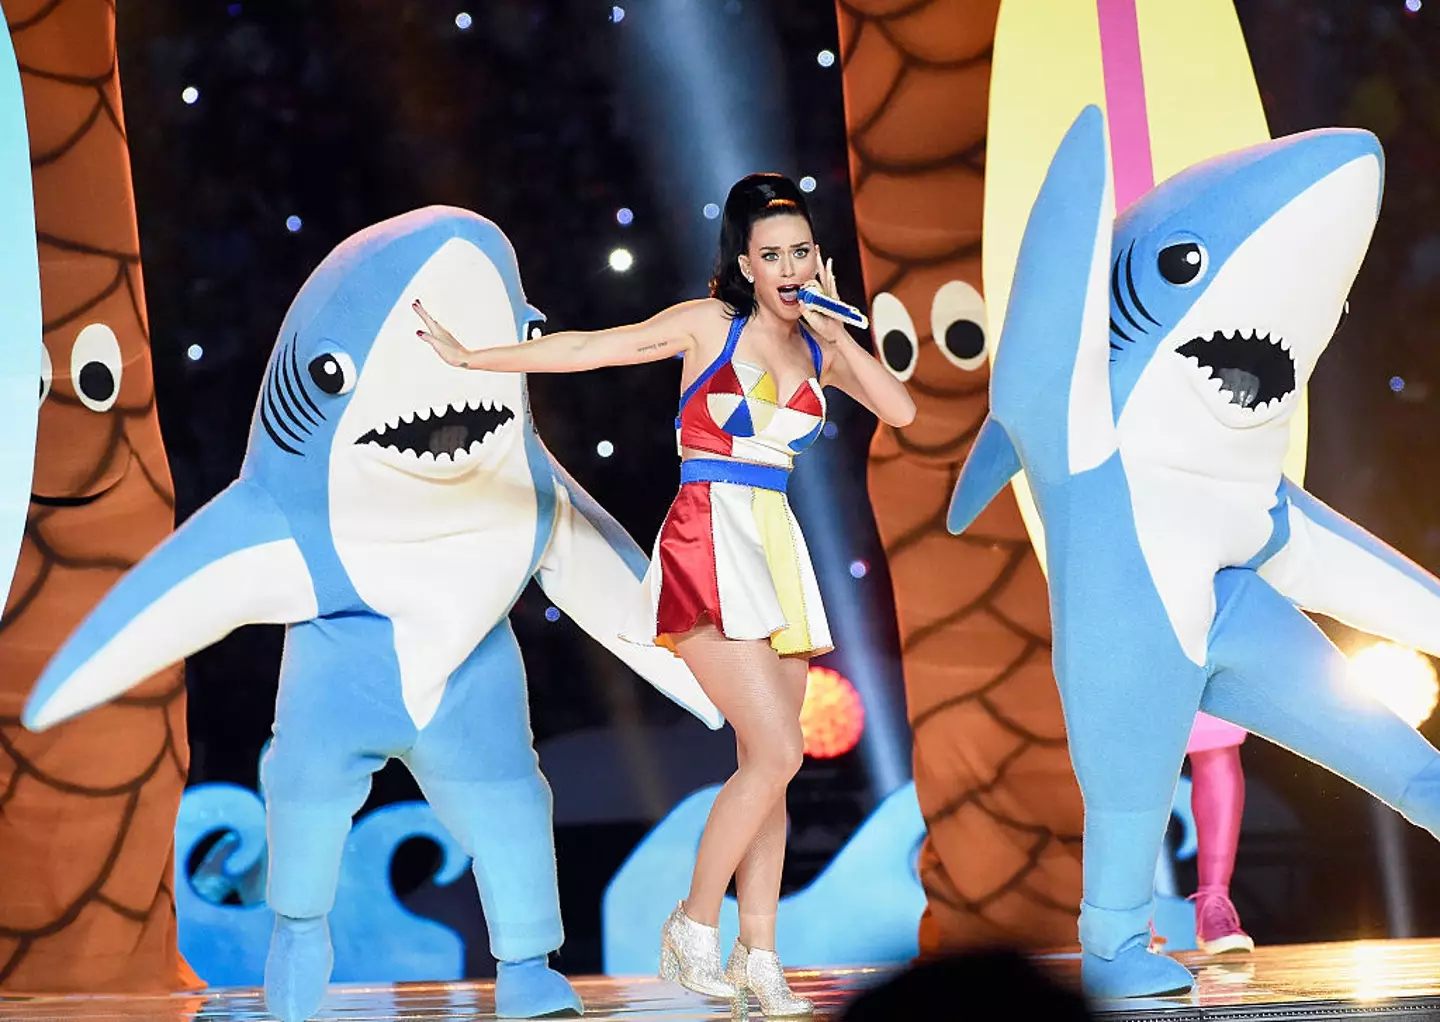 Katy Perry on stage during the 2015 Super Bowl half-time show. (Kevin Mazur/WireImage)